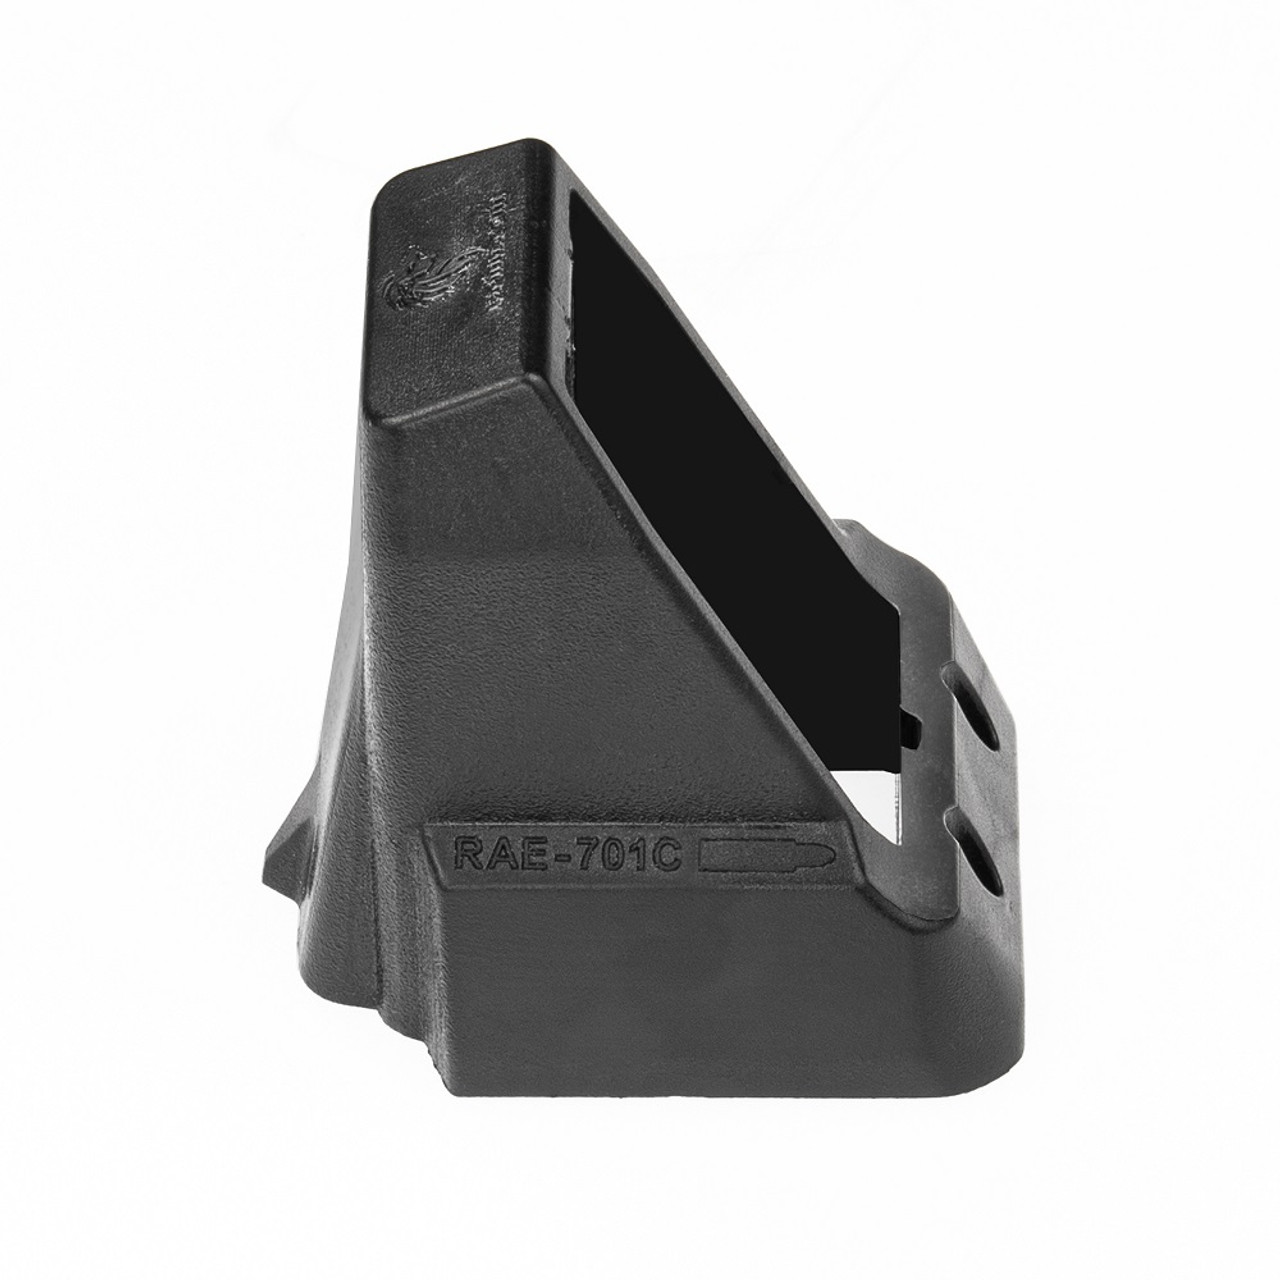 Pistol Magazine Speed Loader Details about   MAKERSHOT Speedloader for SCCY CPX3 CPX4 .380 ACP